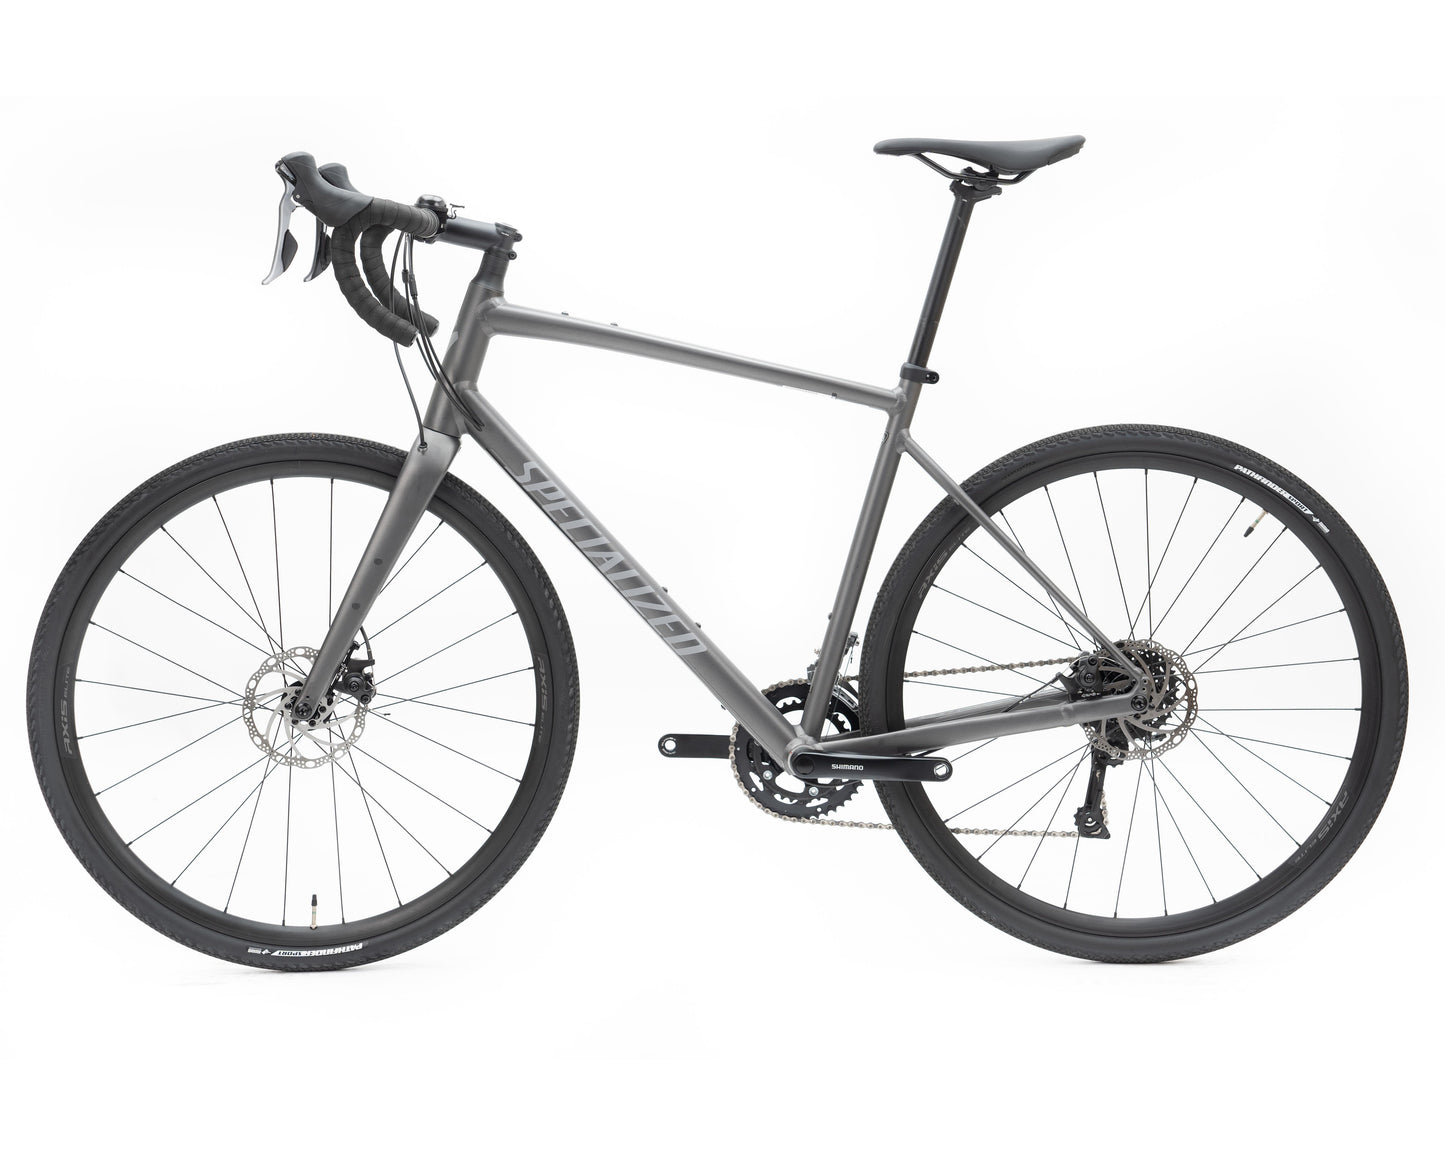 2022 Specialized Diverge E5 Smk/Clgry/Chrm 58 (New Other)